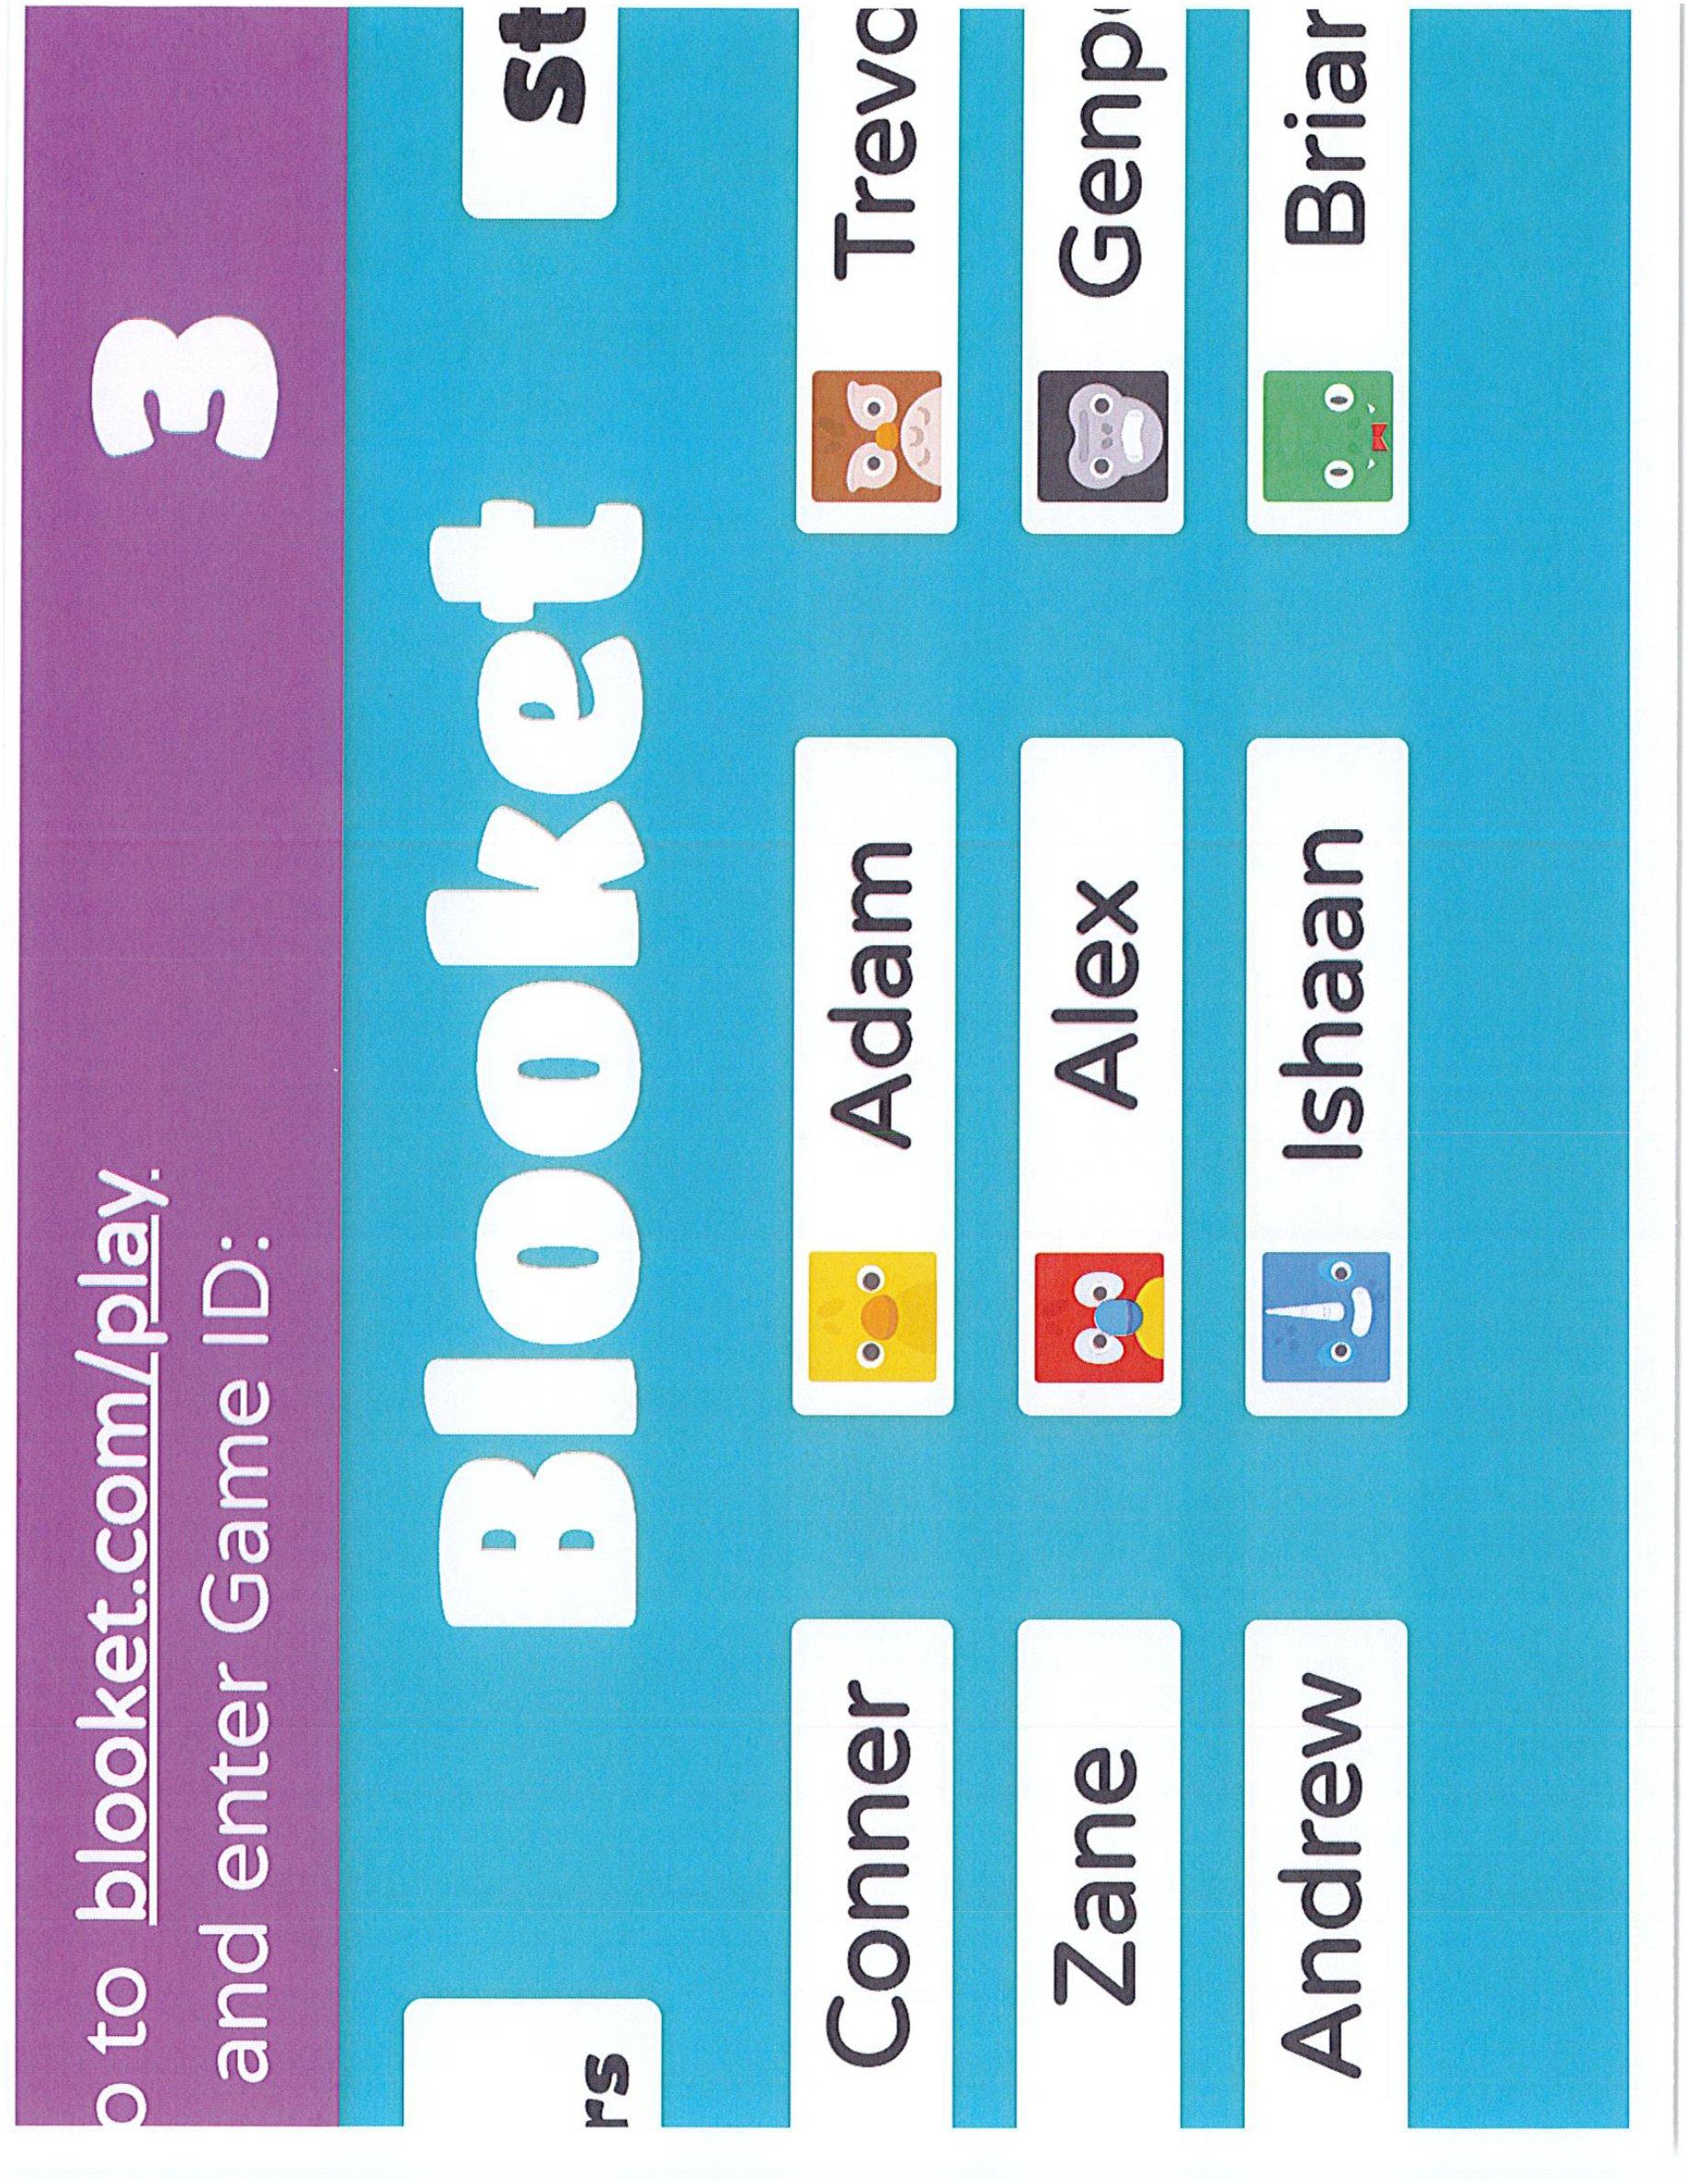 Blooket Game Codes Live Using Blooket In The Classroom Teaching With